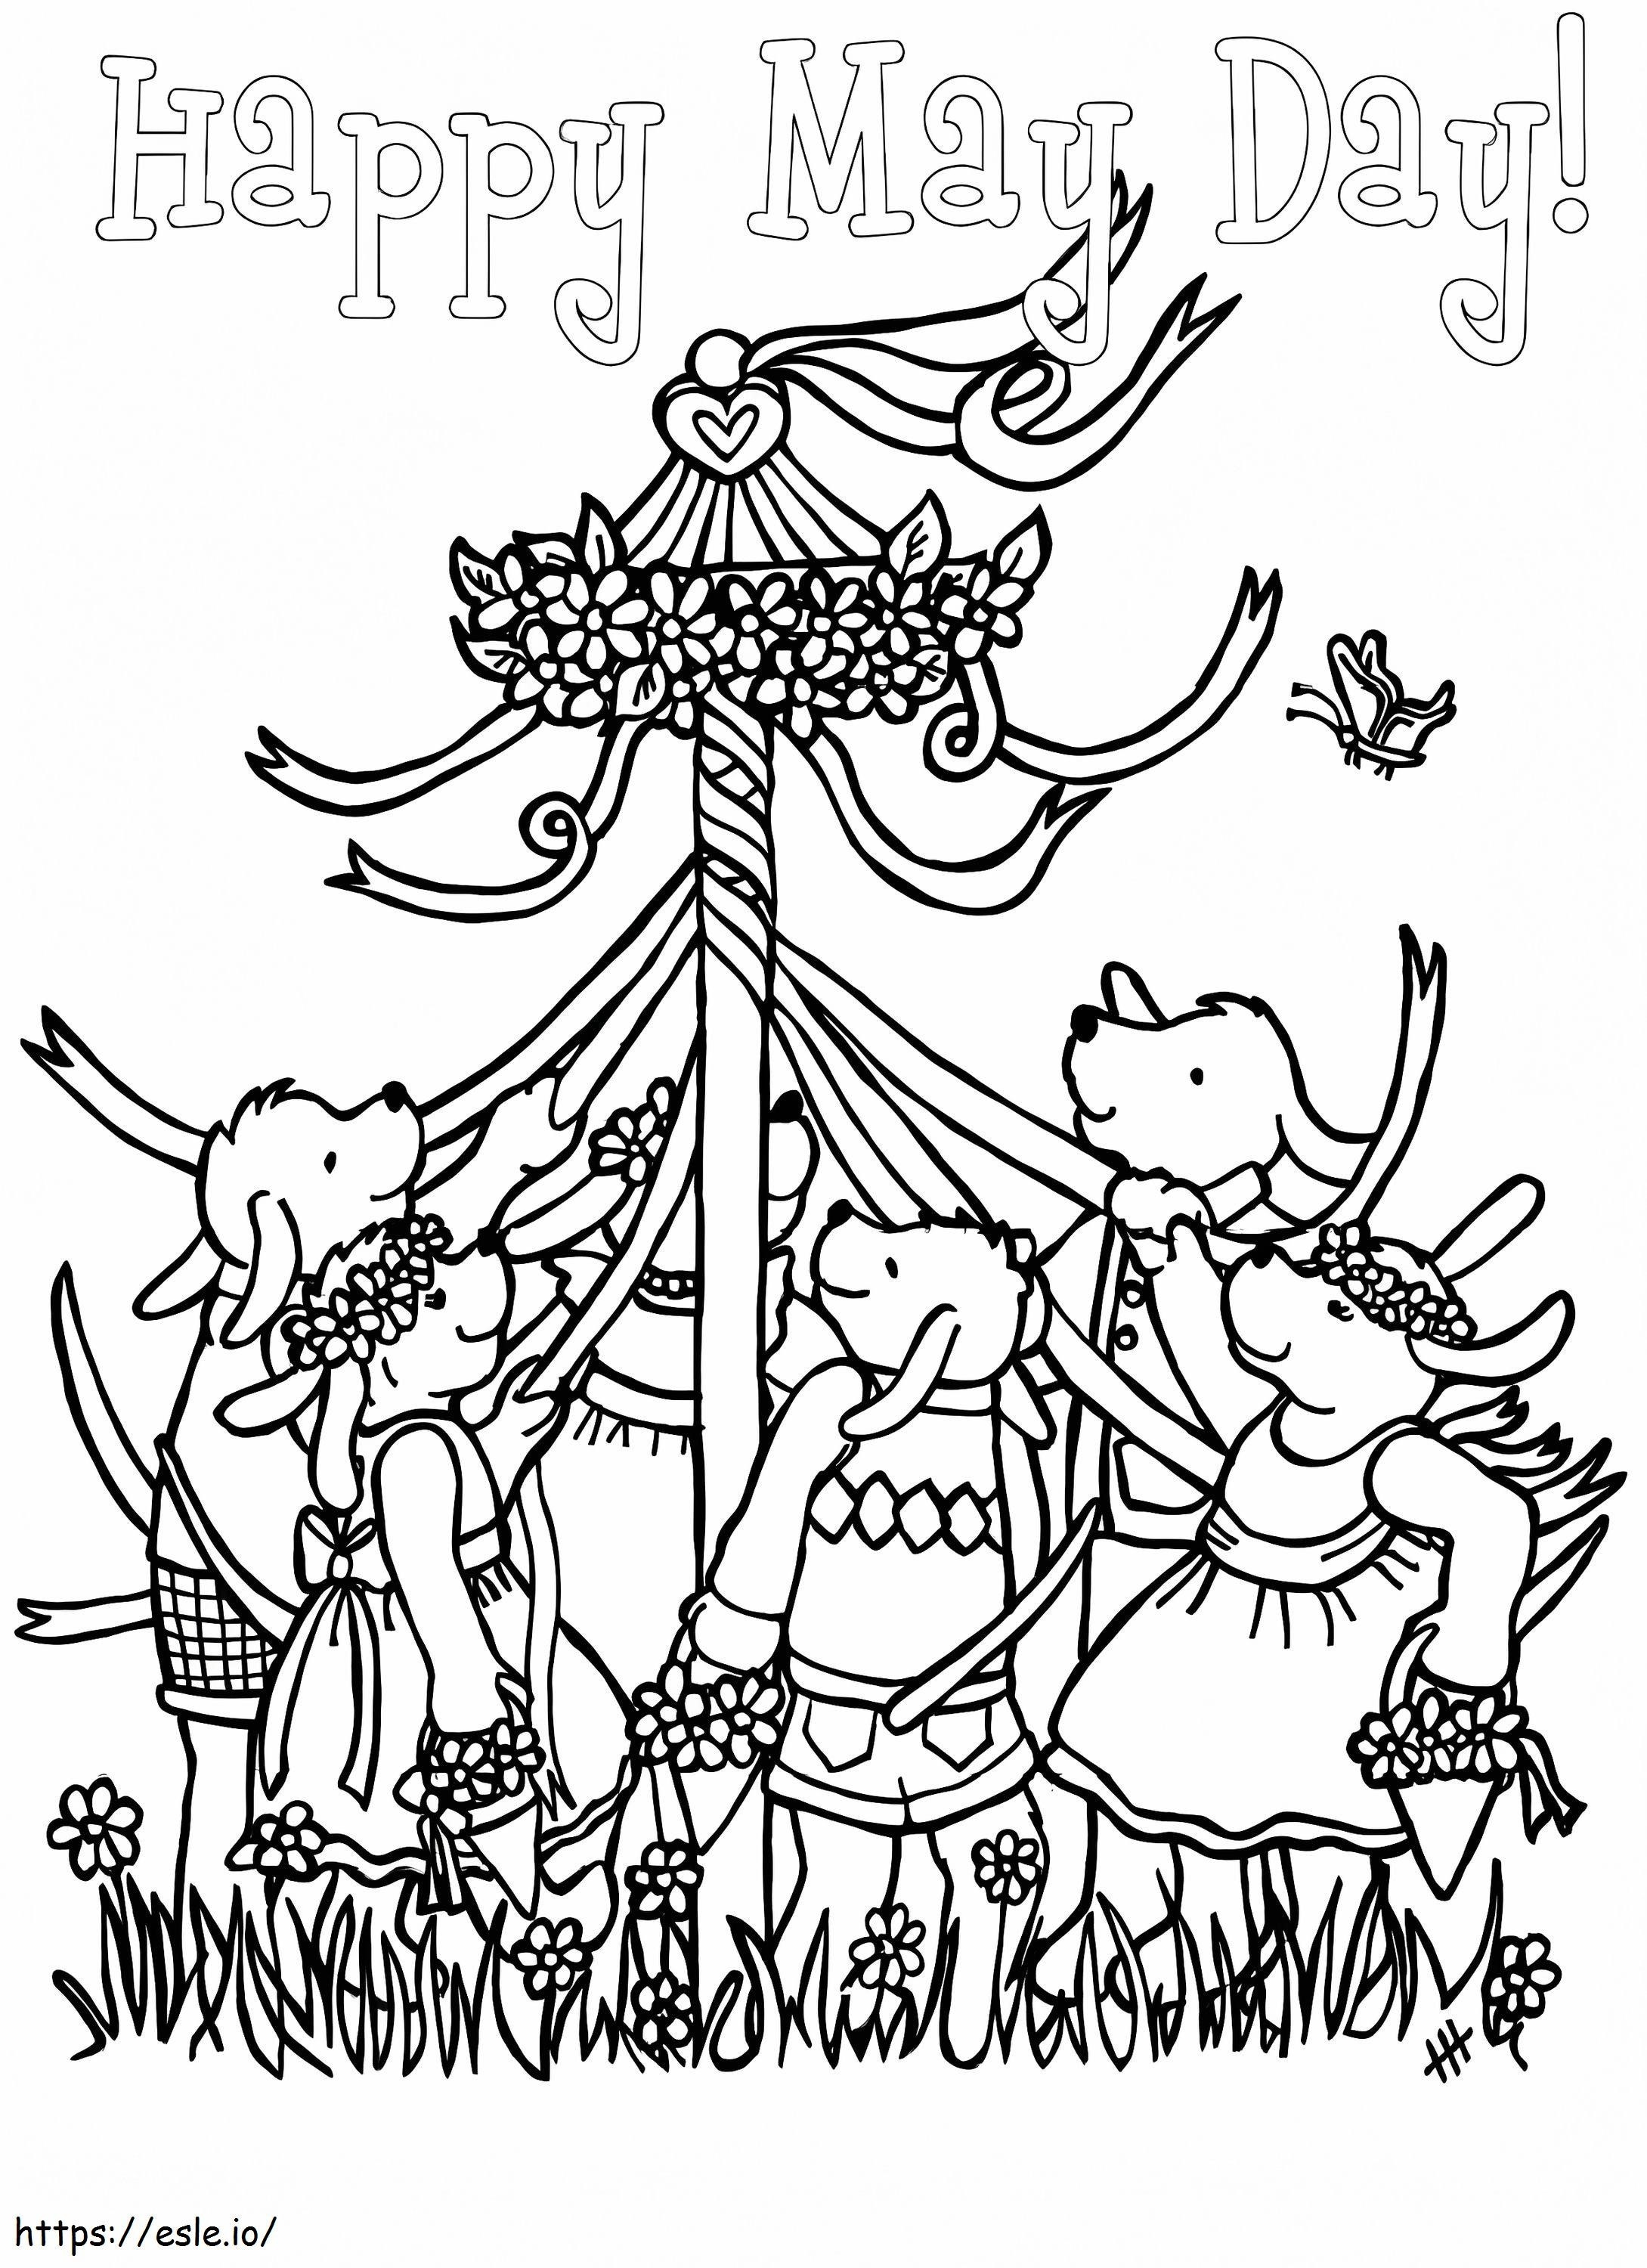 Animals May Day coloring page